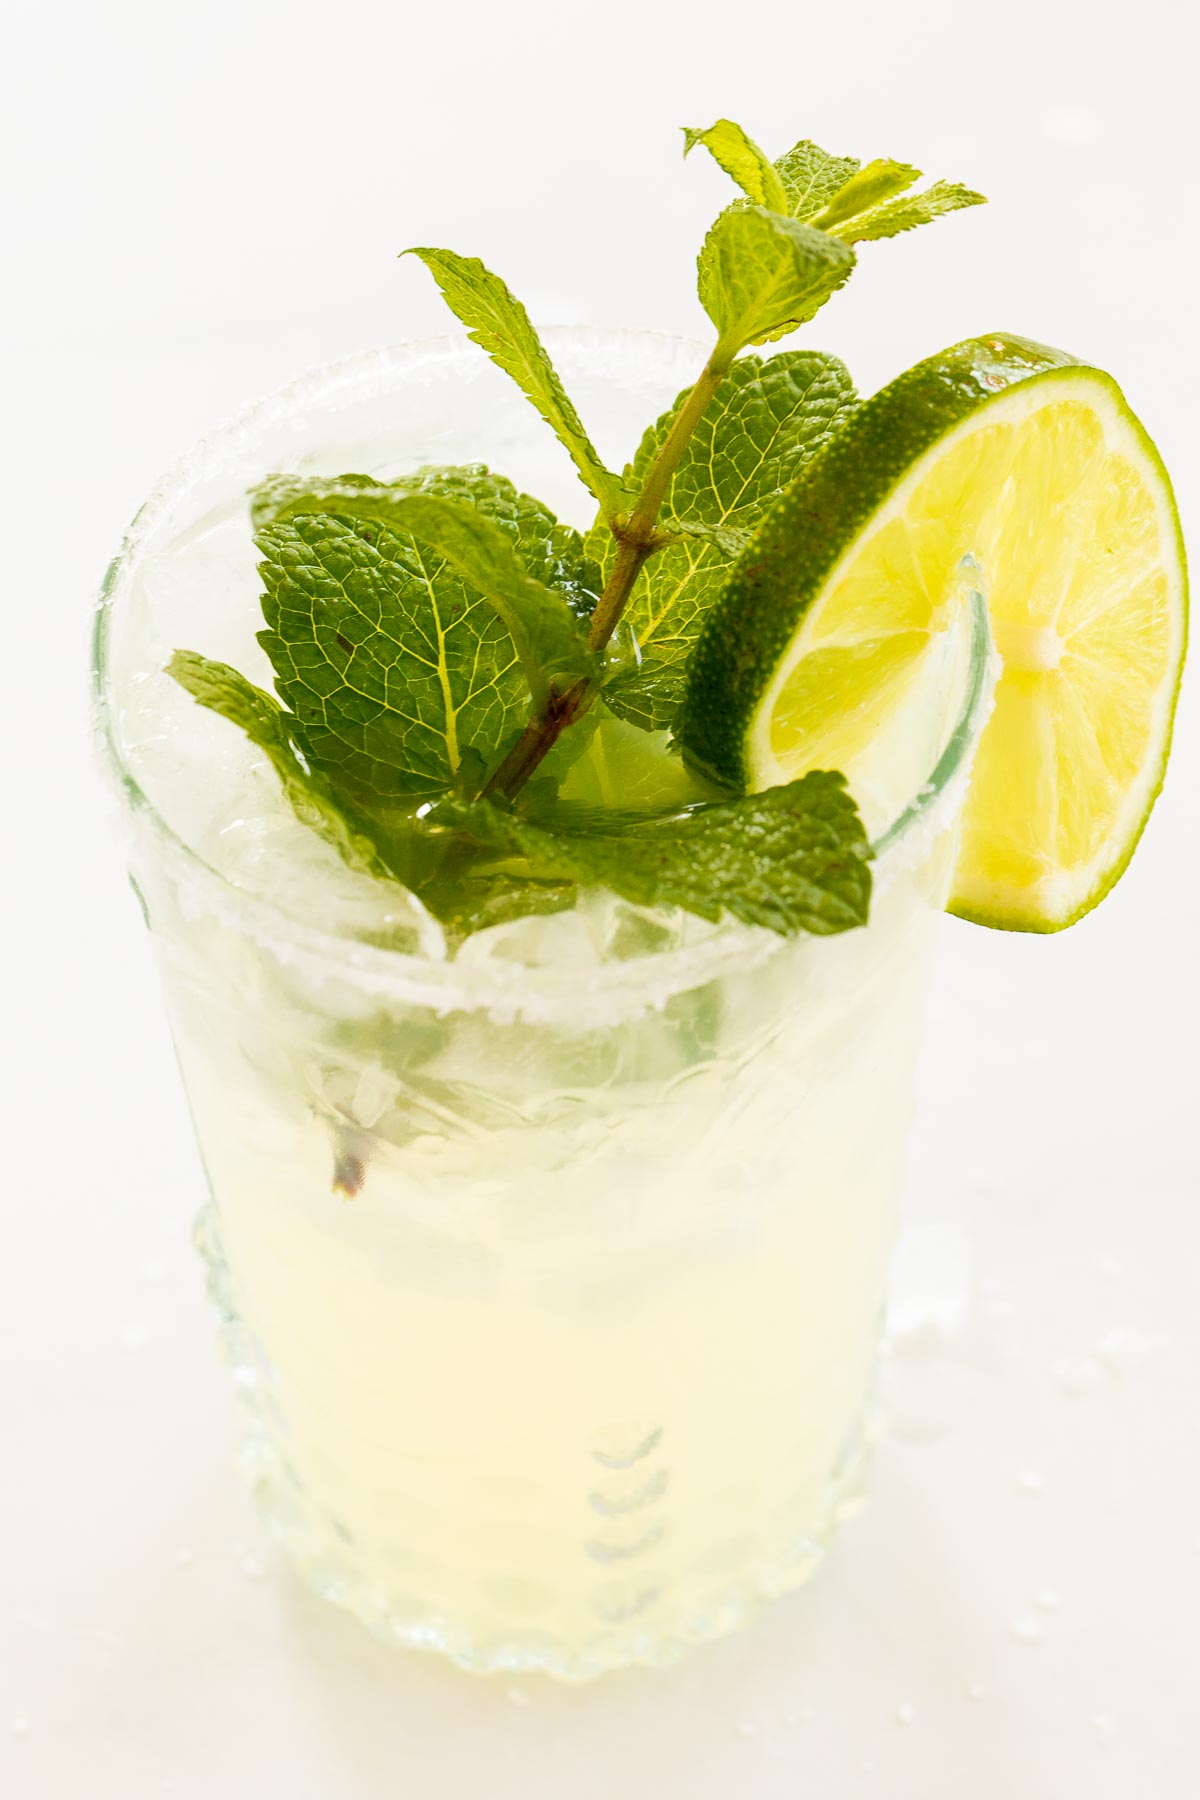 A mint margarita in a clear glass on a white surface